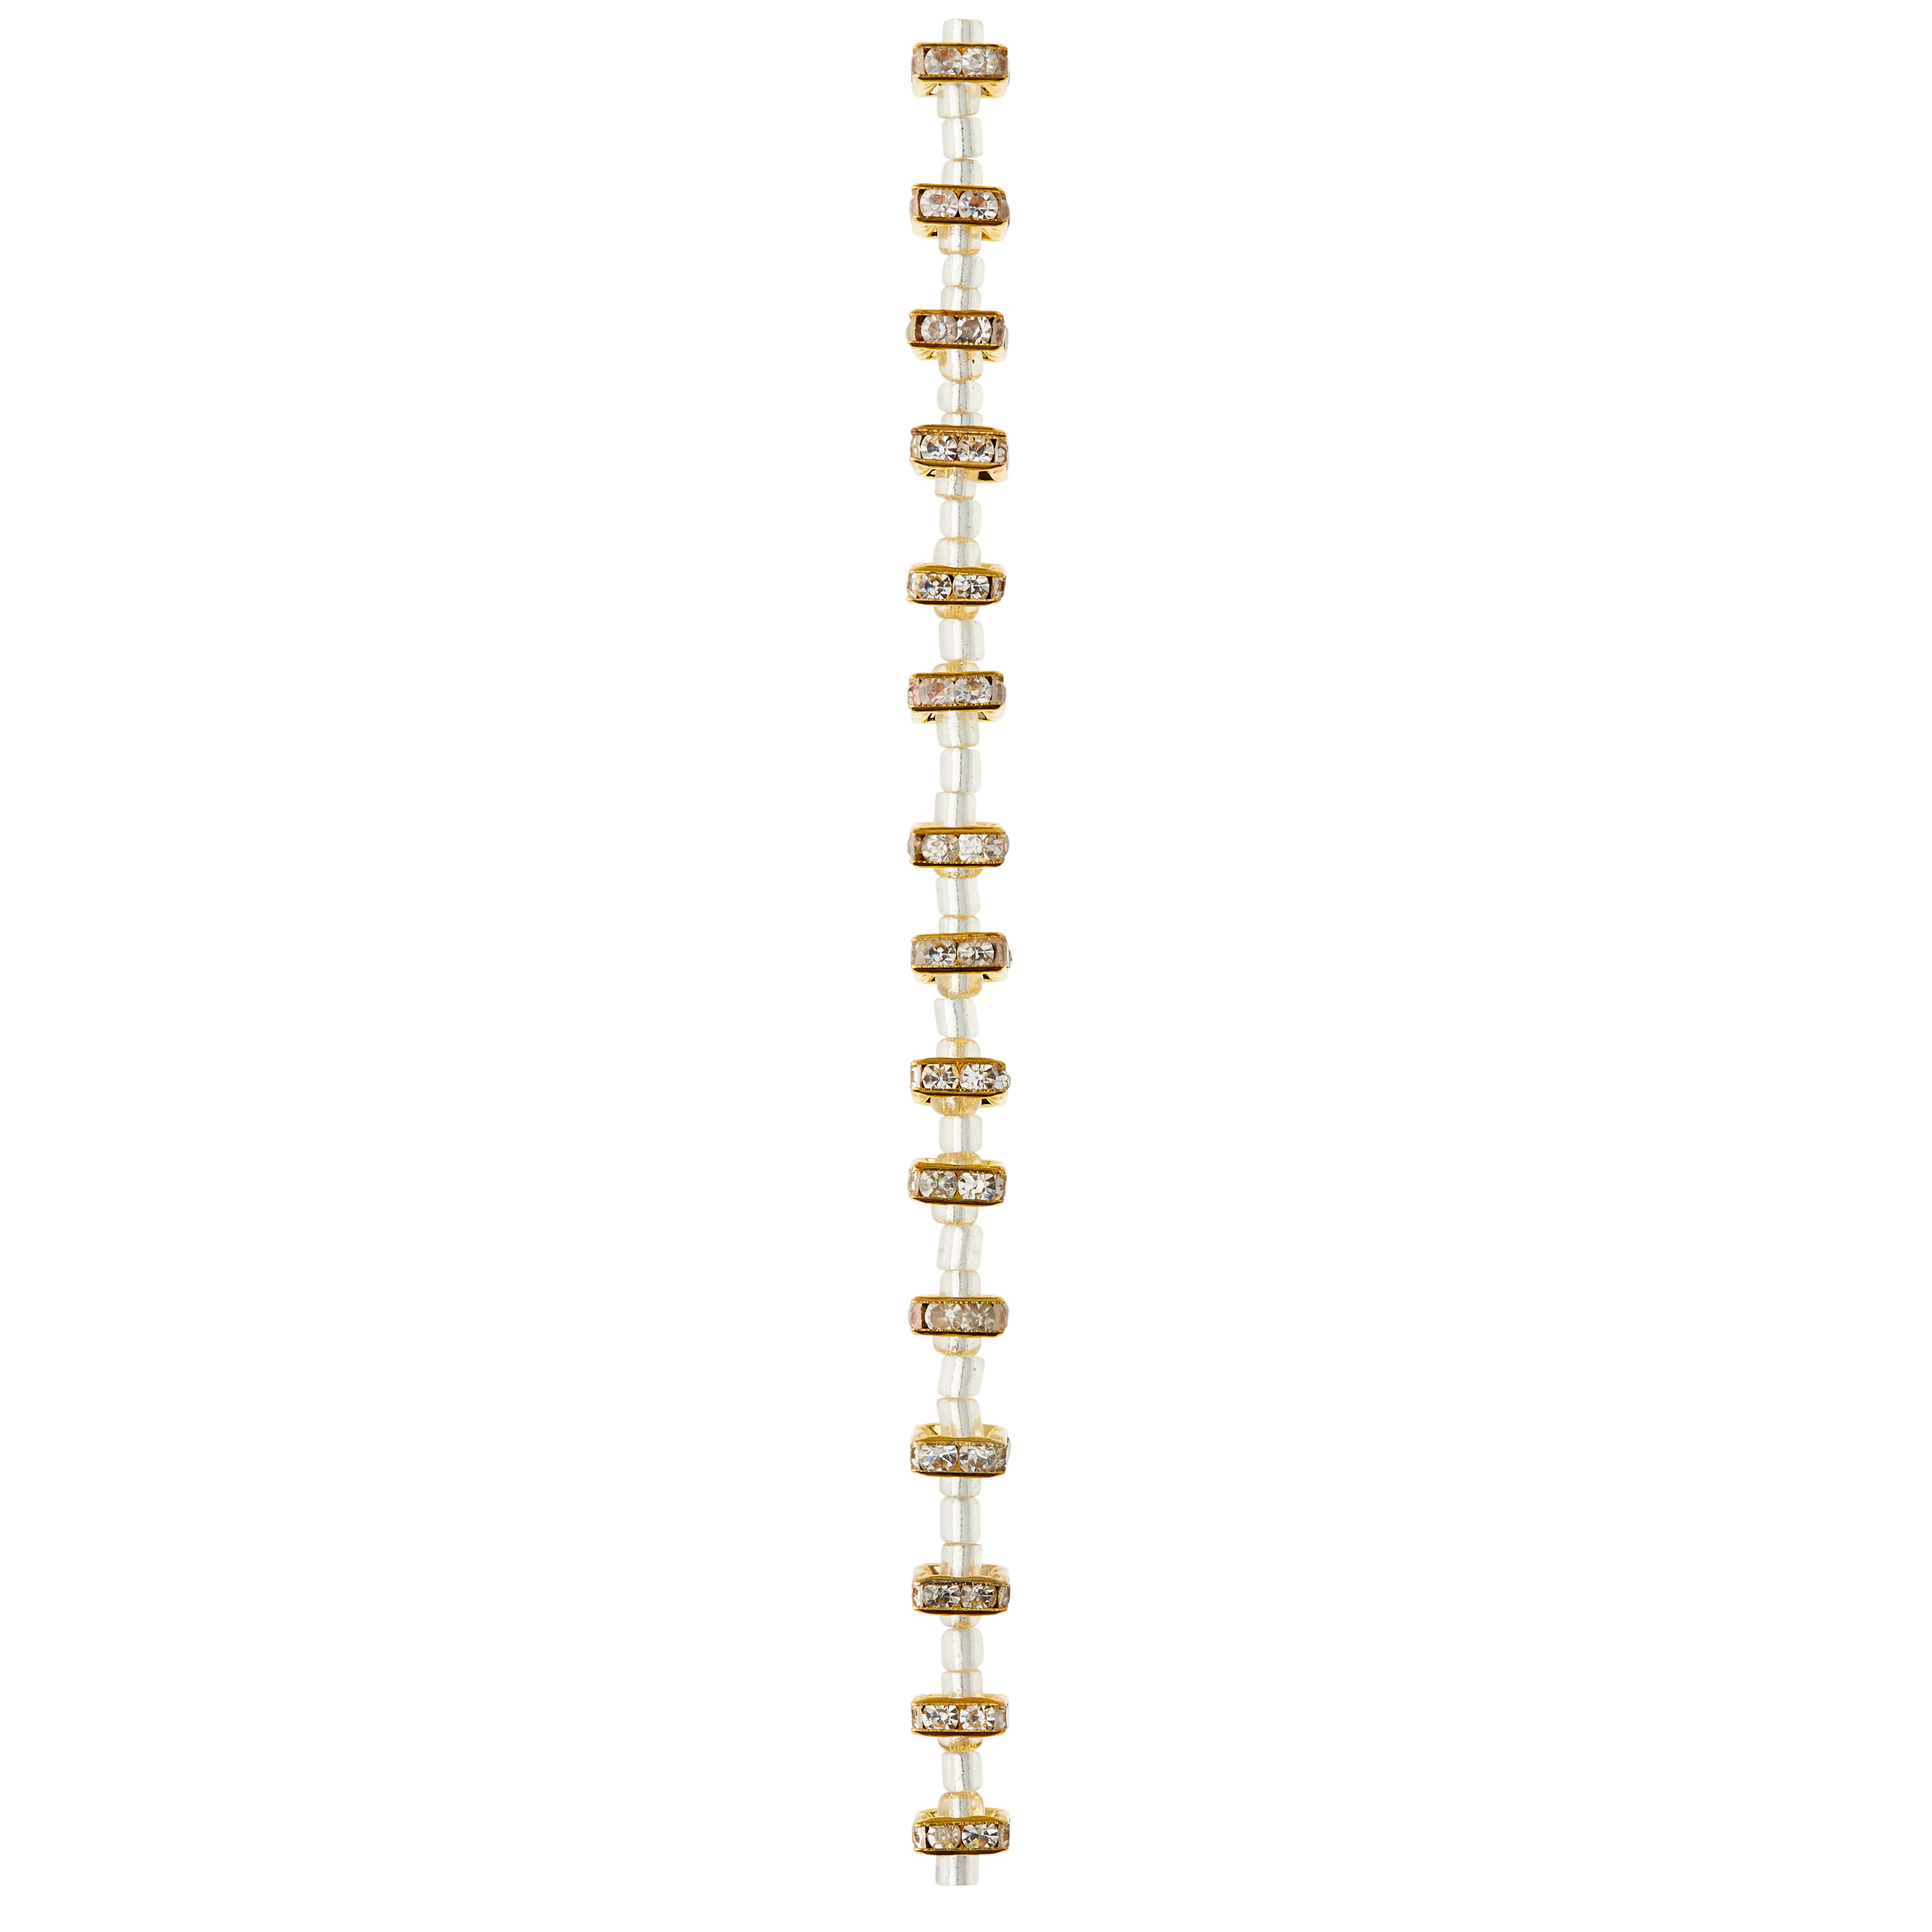 Gold Rhinestone Square Rondelle Beads, 8mm by Bead Landing&#x2122;